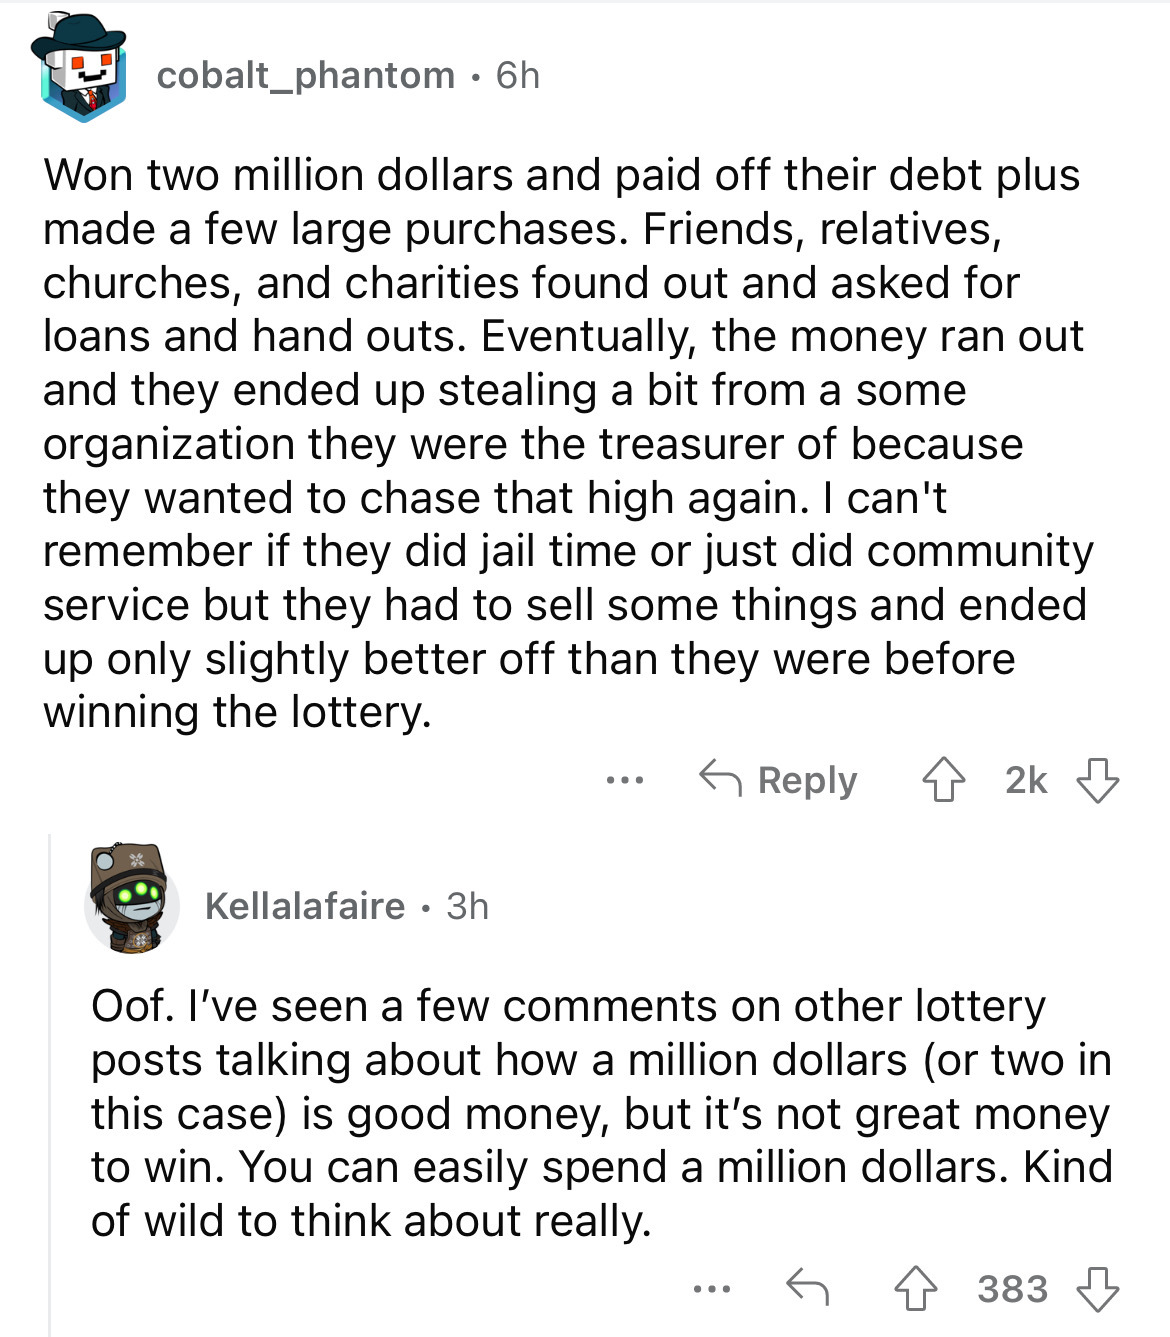 document - cobalt_phantom. 6h Won two million dollars and paid off their debt plus made a few large purchases. Friends, relatives, churches, and charities found out and asked for loans and hand outs. Eventually, the money ran out and they ended up stealin